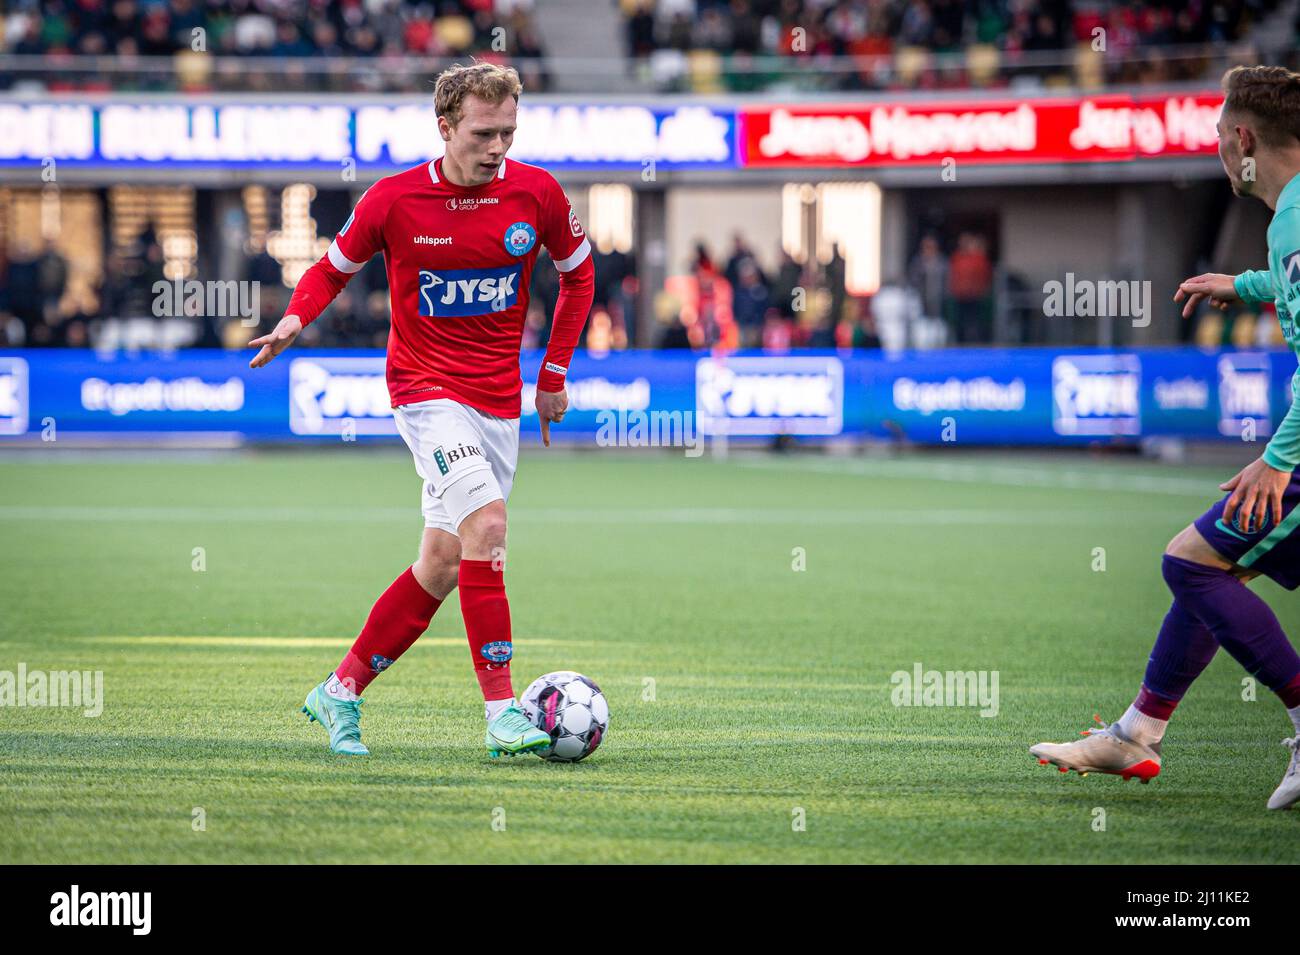 Silkeborg, Denmark. 20th, March 2022. Anders Klynge (21) of Silkeborg IF seen during the 3F Superliga match between Silkeborg IF and FC Midtjylland at Jysk Park in Silkeborg. (Photo credit: Gonzales Photo - Morten Kjaer). Stock Photo